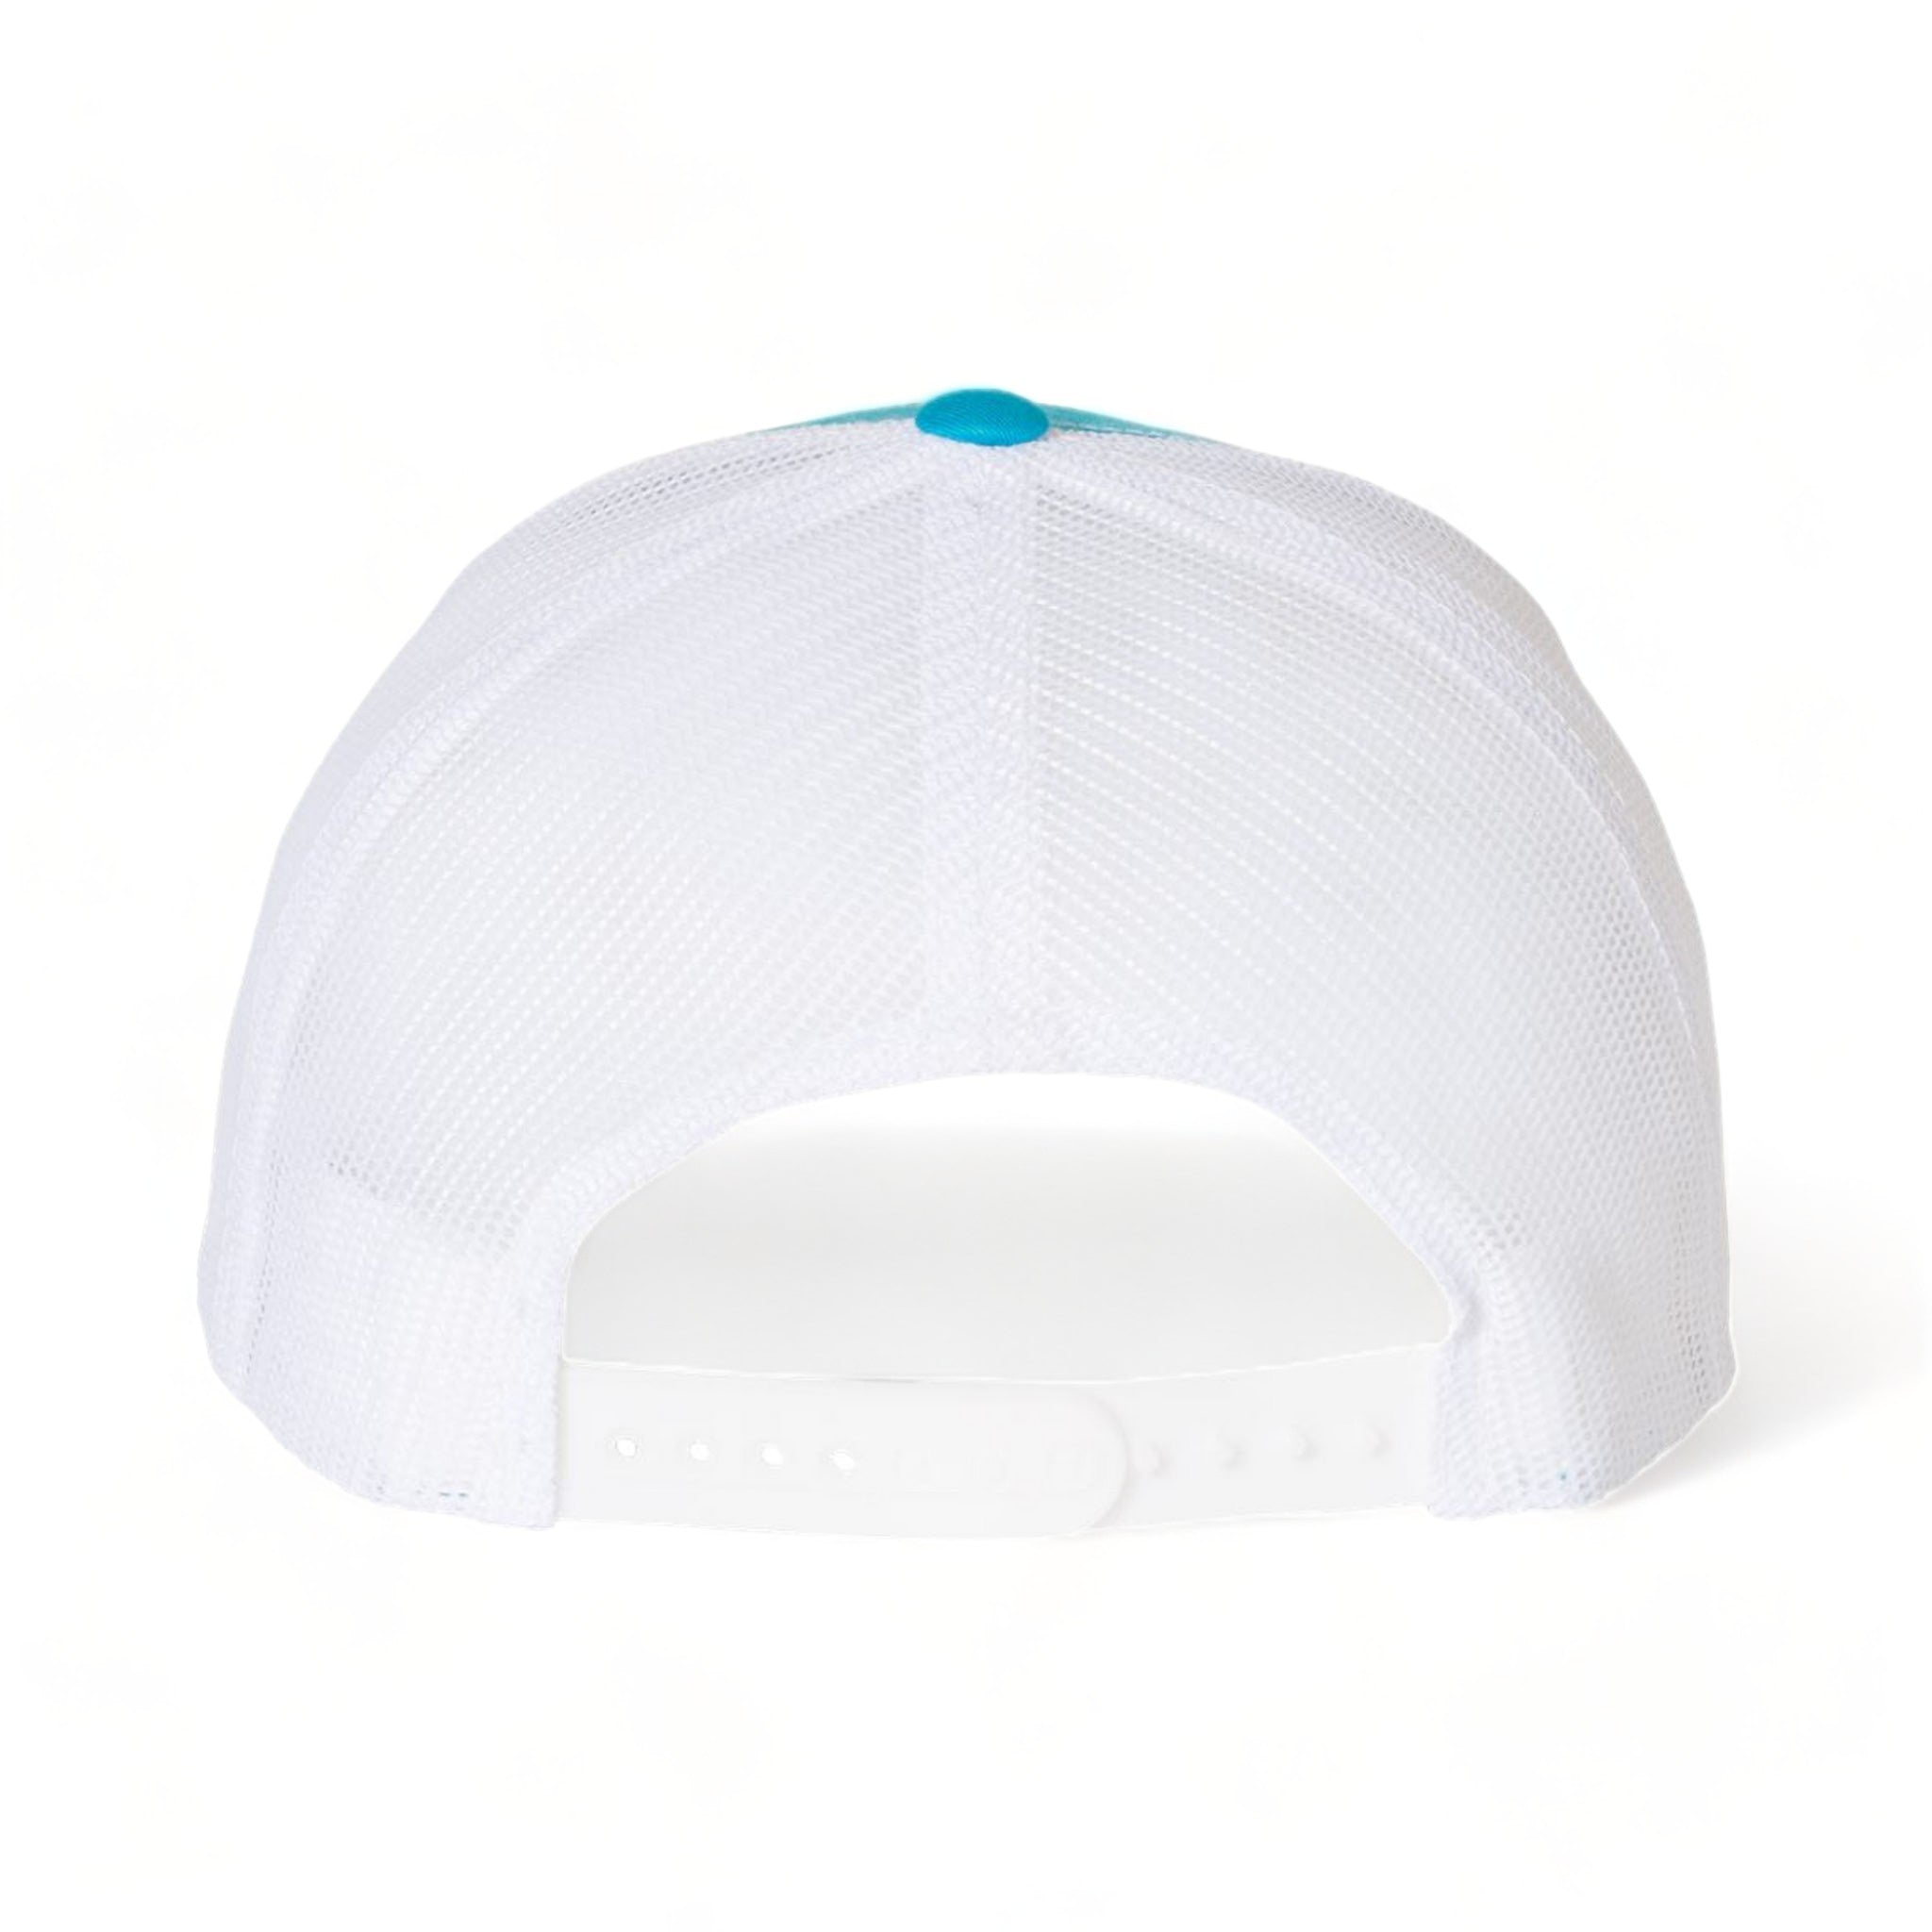 Back view of YP Classics 6606 custom hat in turquoise and white